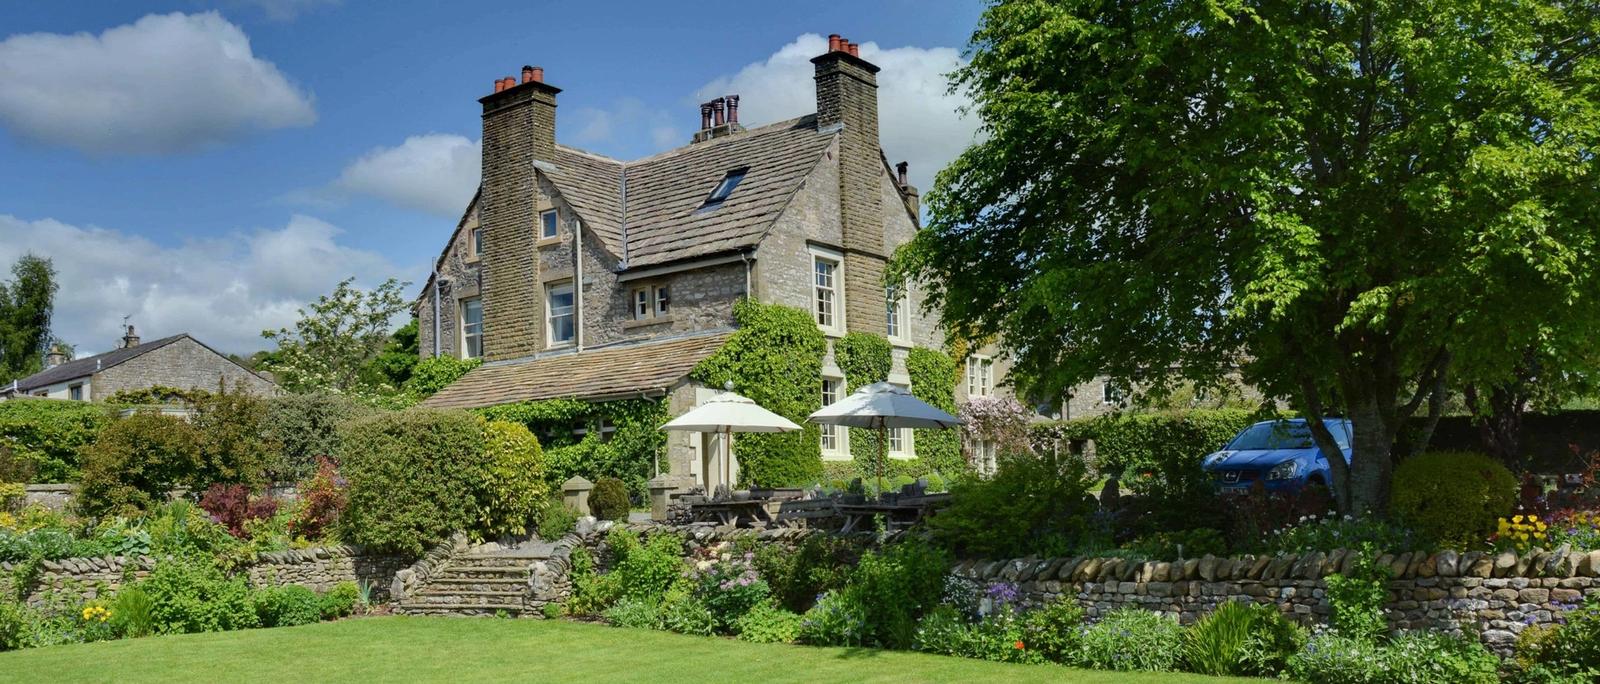 Hotel deals and special offers in Yorkshire